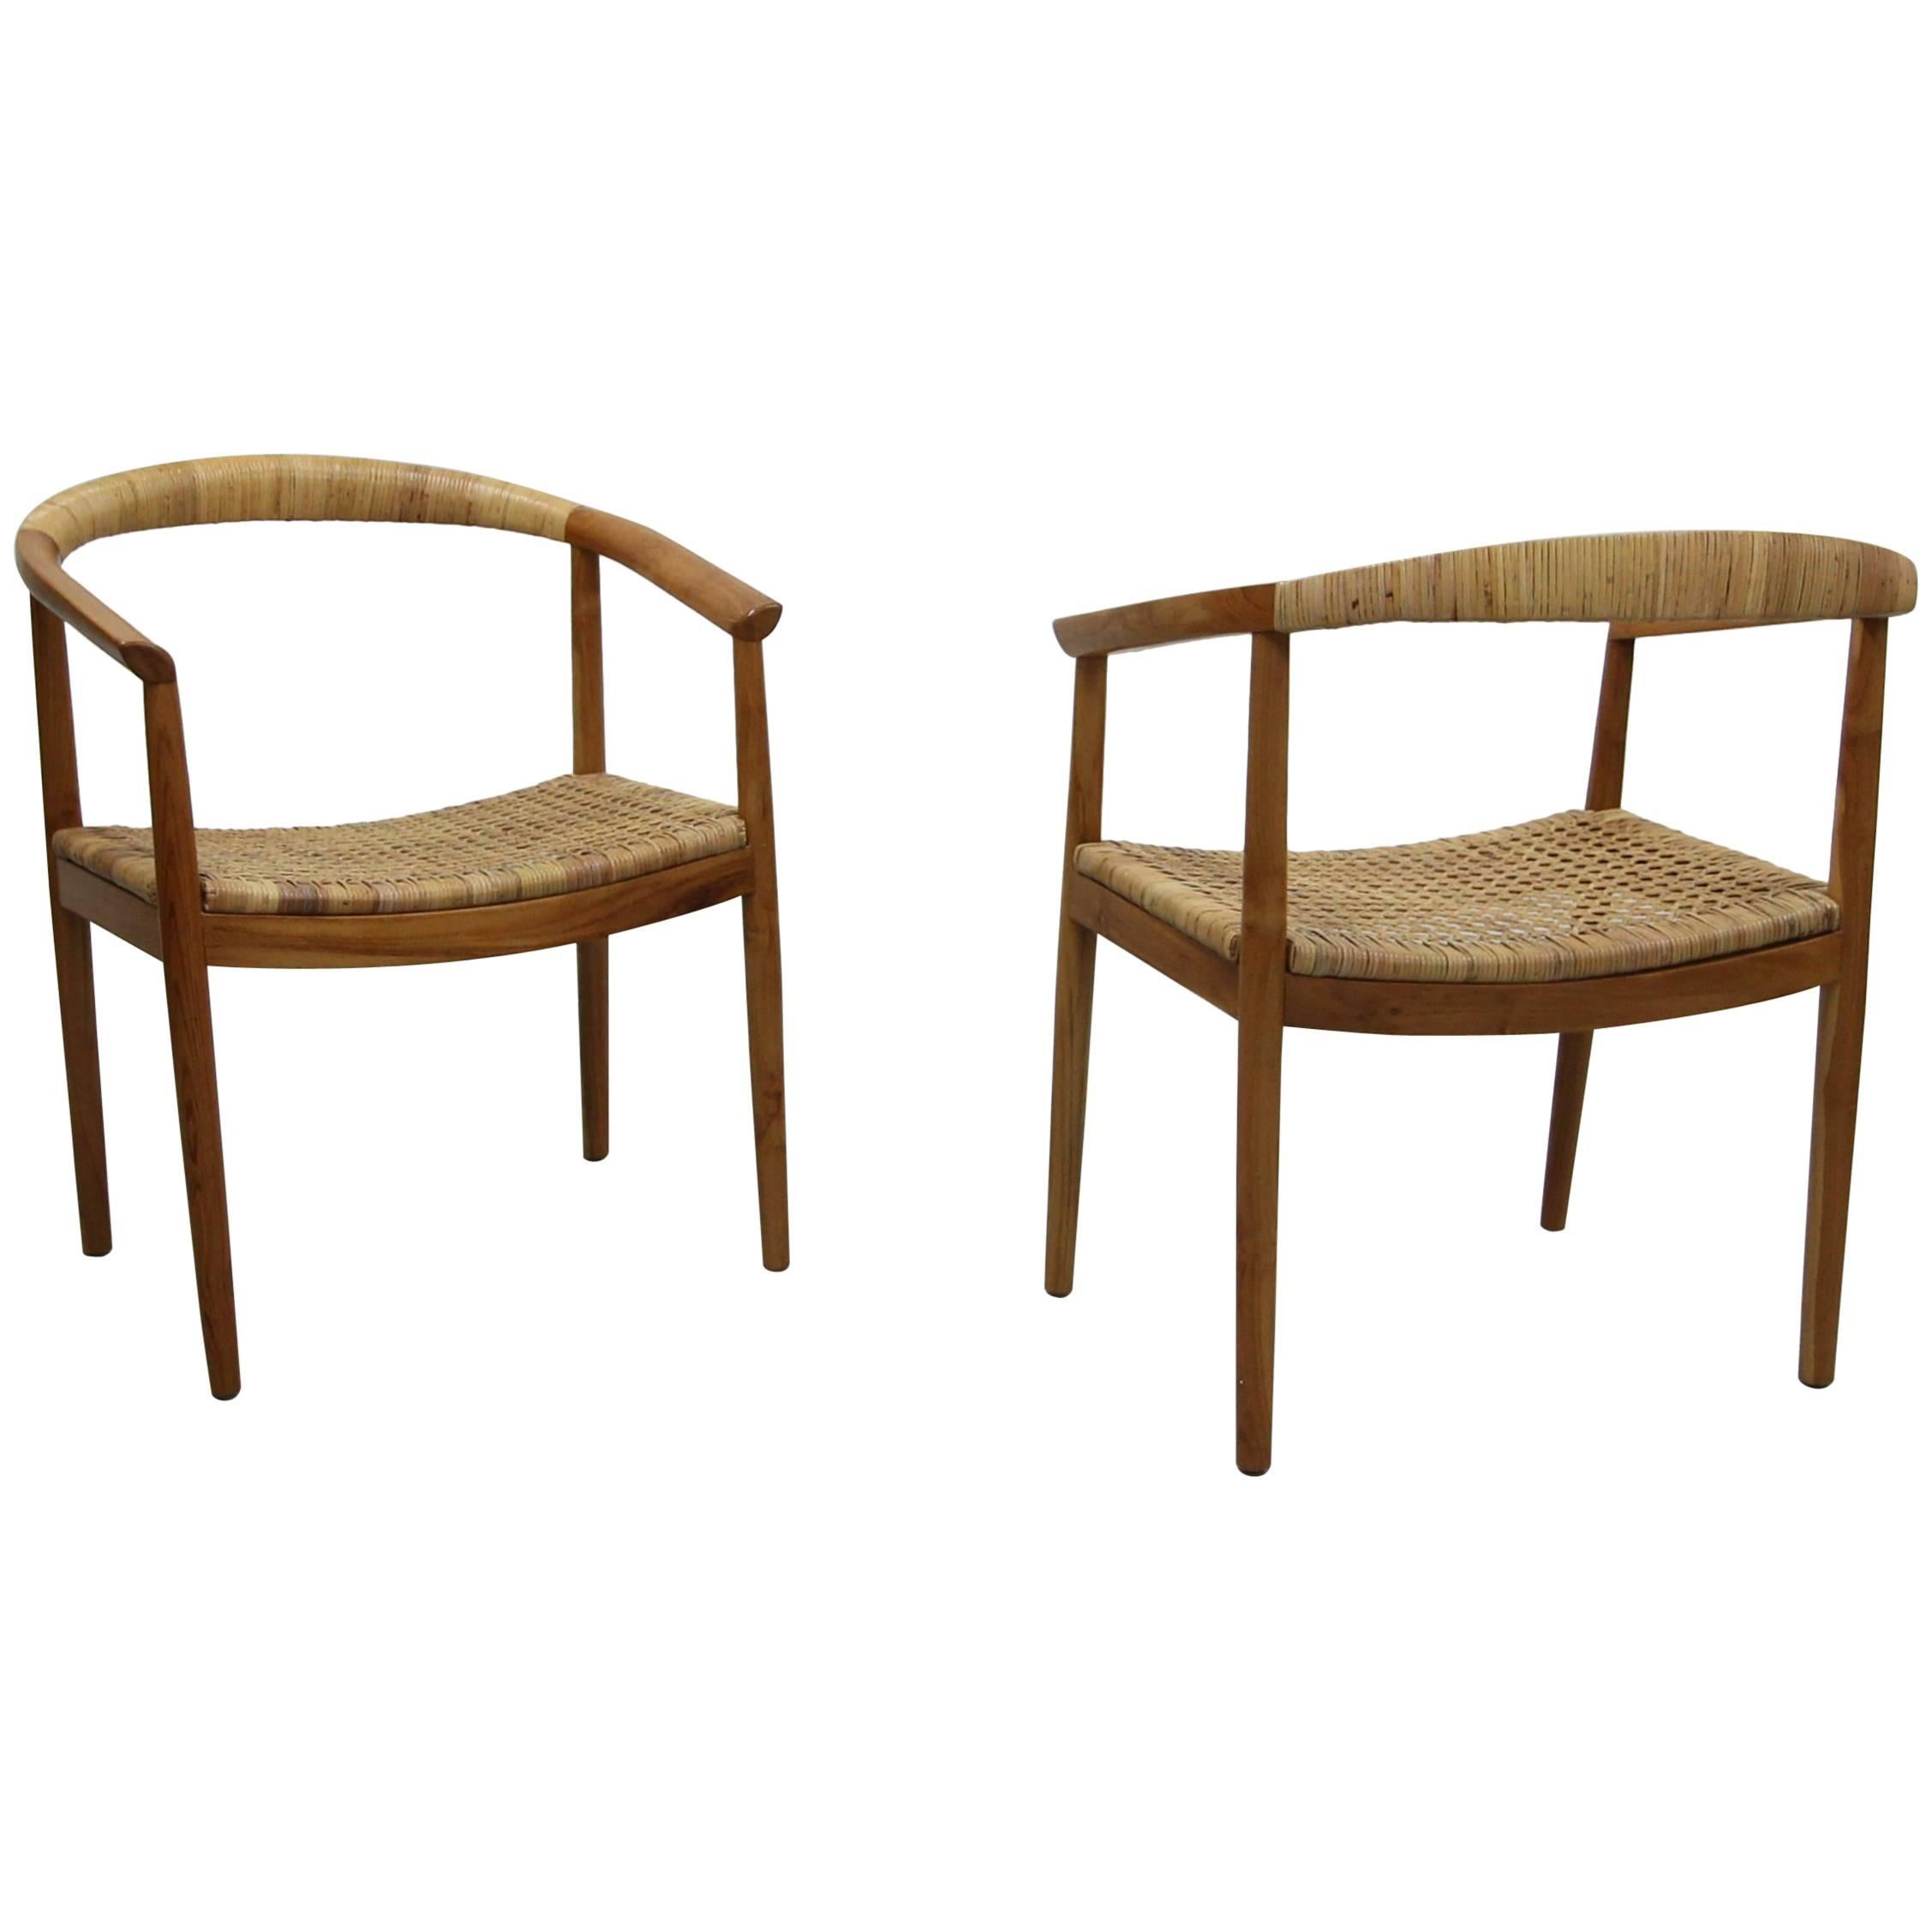 Vintage Pair of Oversized Danish Style Teak and Cane Round Back Side Chairs